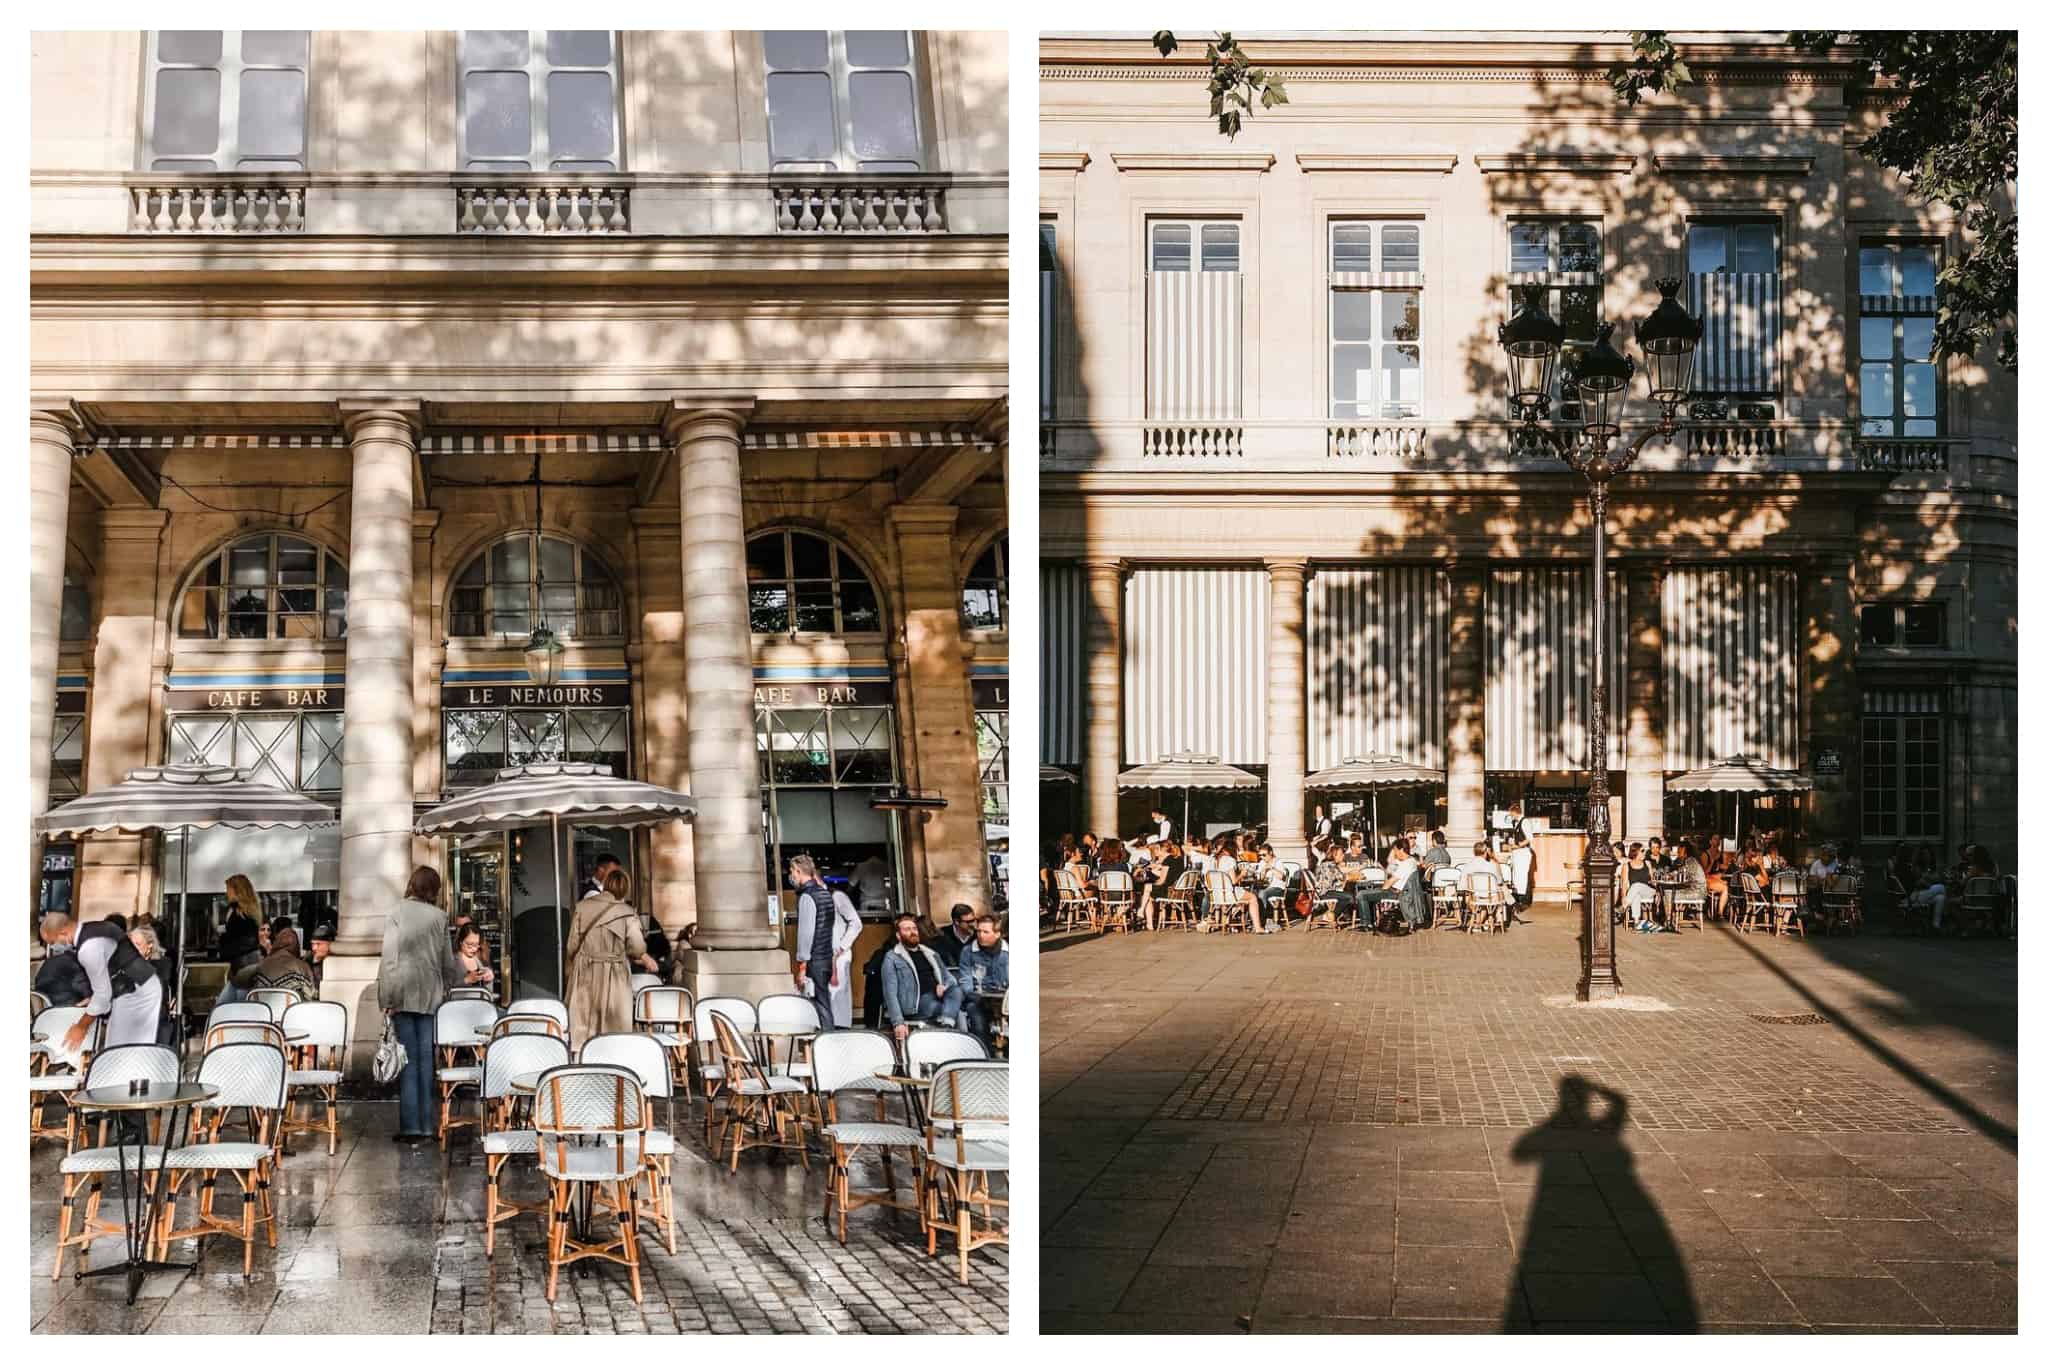 Two pictures from the famous Parisian café Le Nemours. Left: A close up to Le Nemours terrace after a brief spring rain. Right: A farther photo of Le Nemours with the photographer's shadow in the middle.